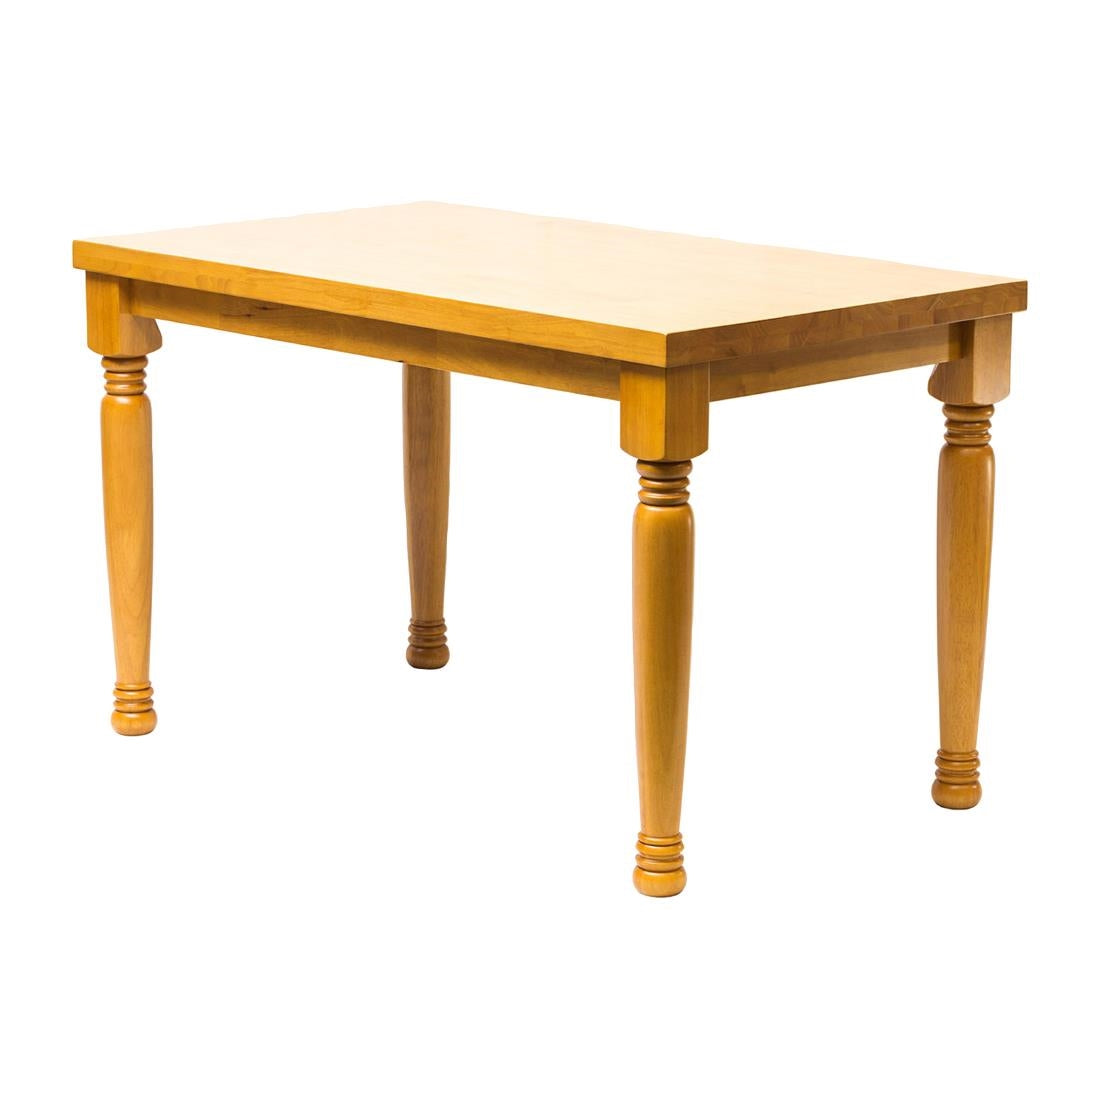 FT494 Cotswold Soft Oak Rectangular Dining Table 1200x700mm JD Catering Equipment Solutions Ltd